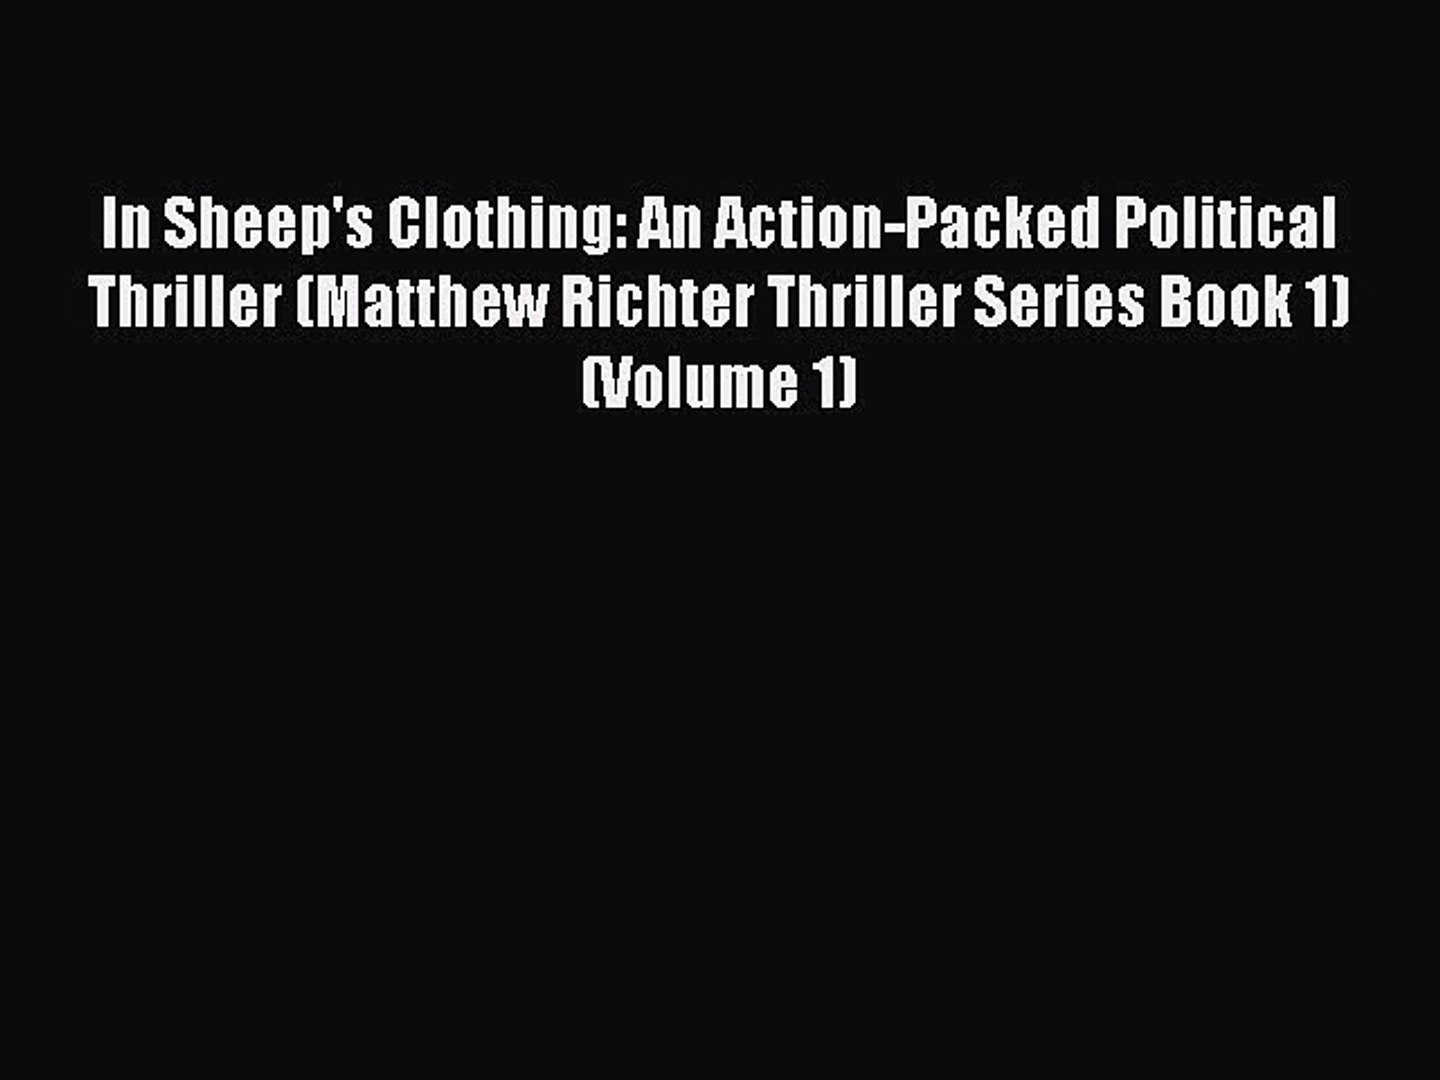 Read In Sheep's Clothing: An Action-Packed Political Thriller (Matthew Richter Thriller Series